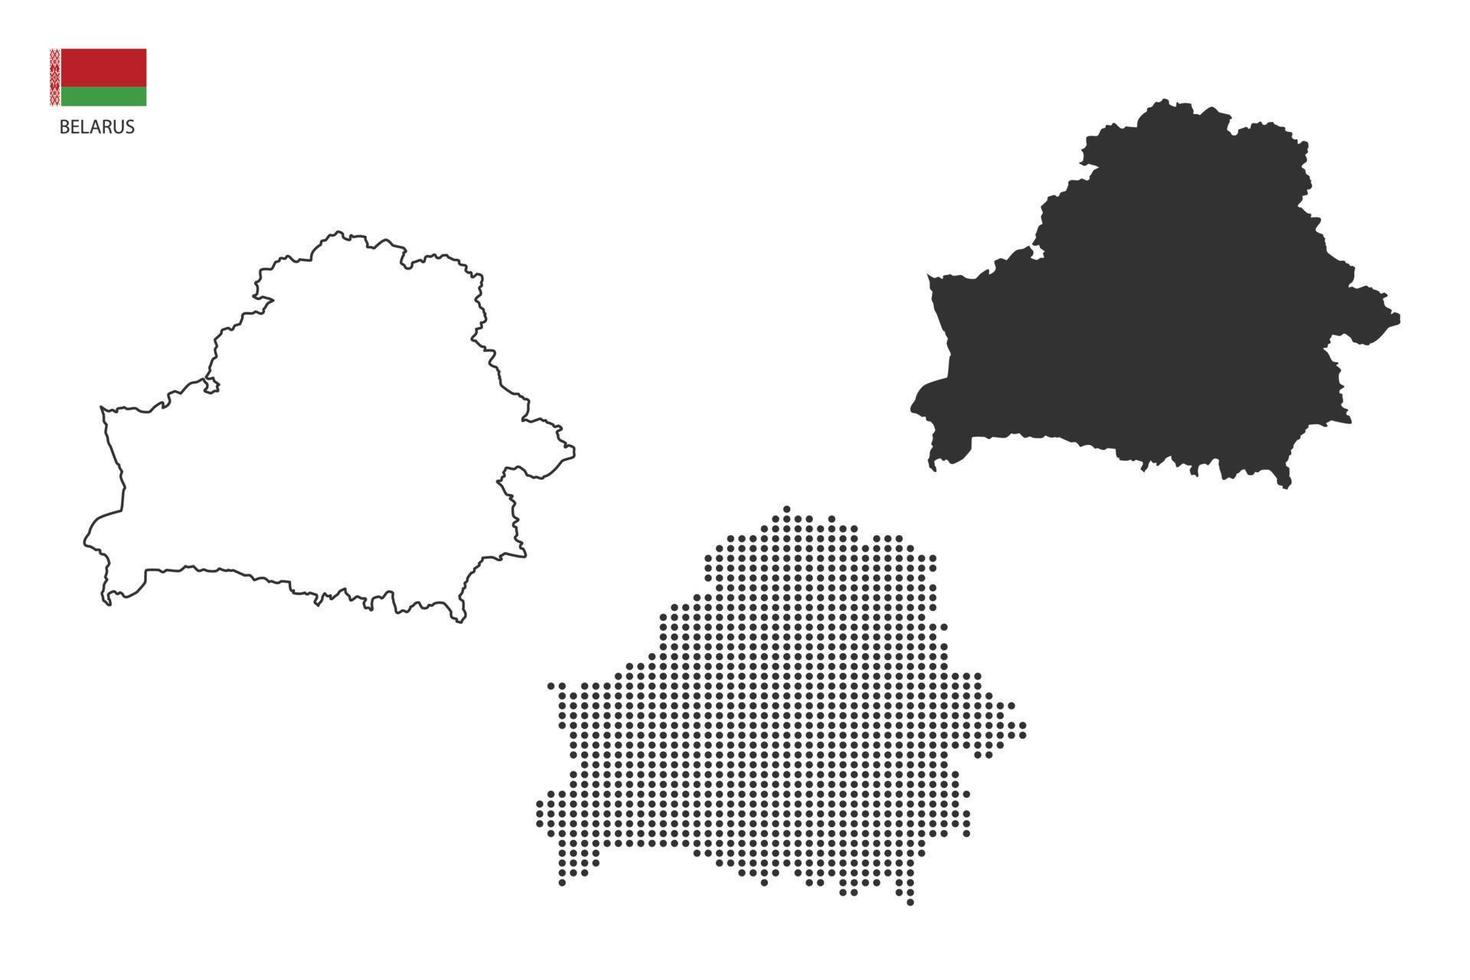 3 versions of Belarus map city vector by thin black outline simplicity style, Black dot style and Dark shadow style. All in the white background.